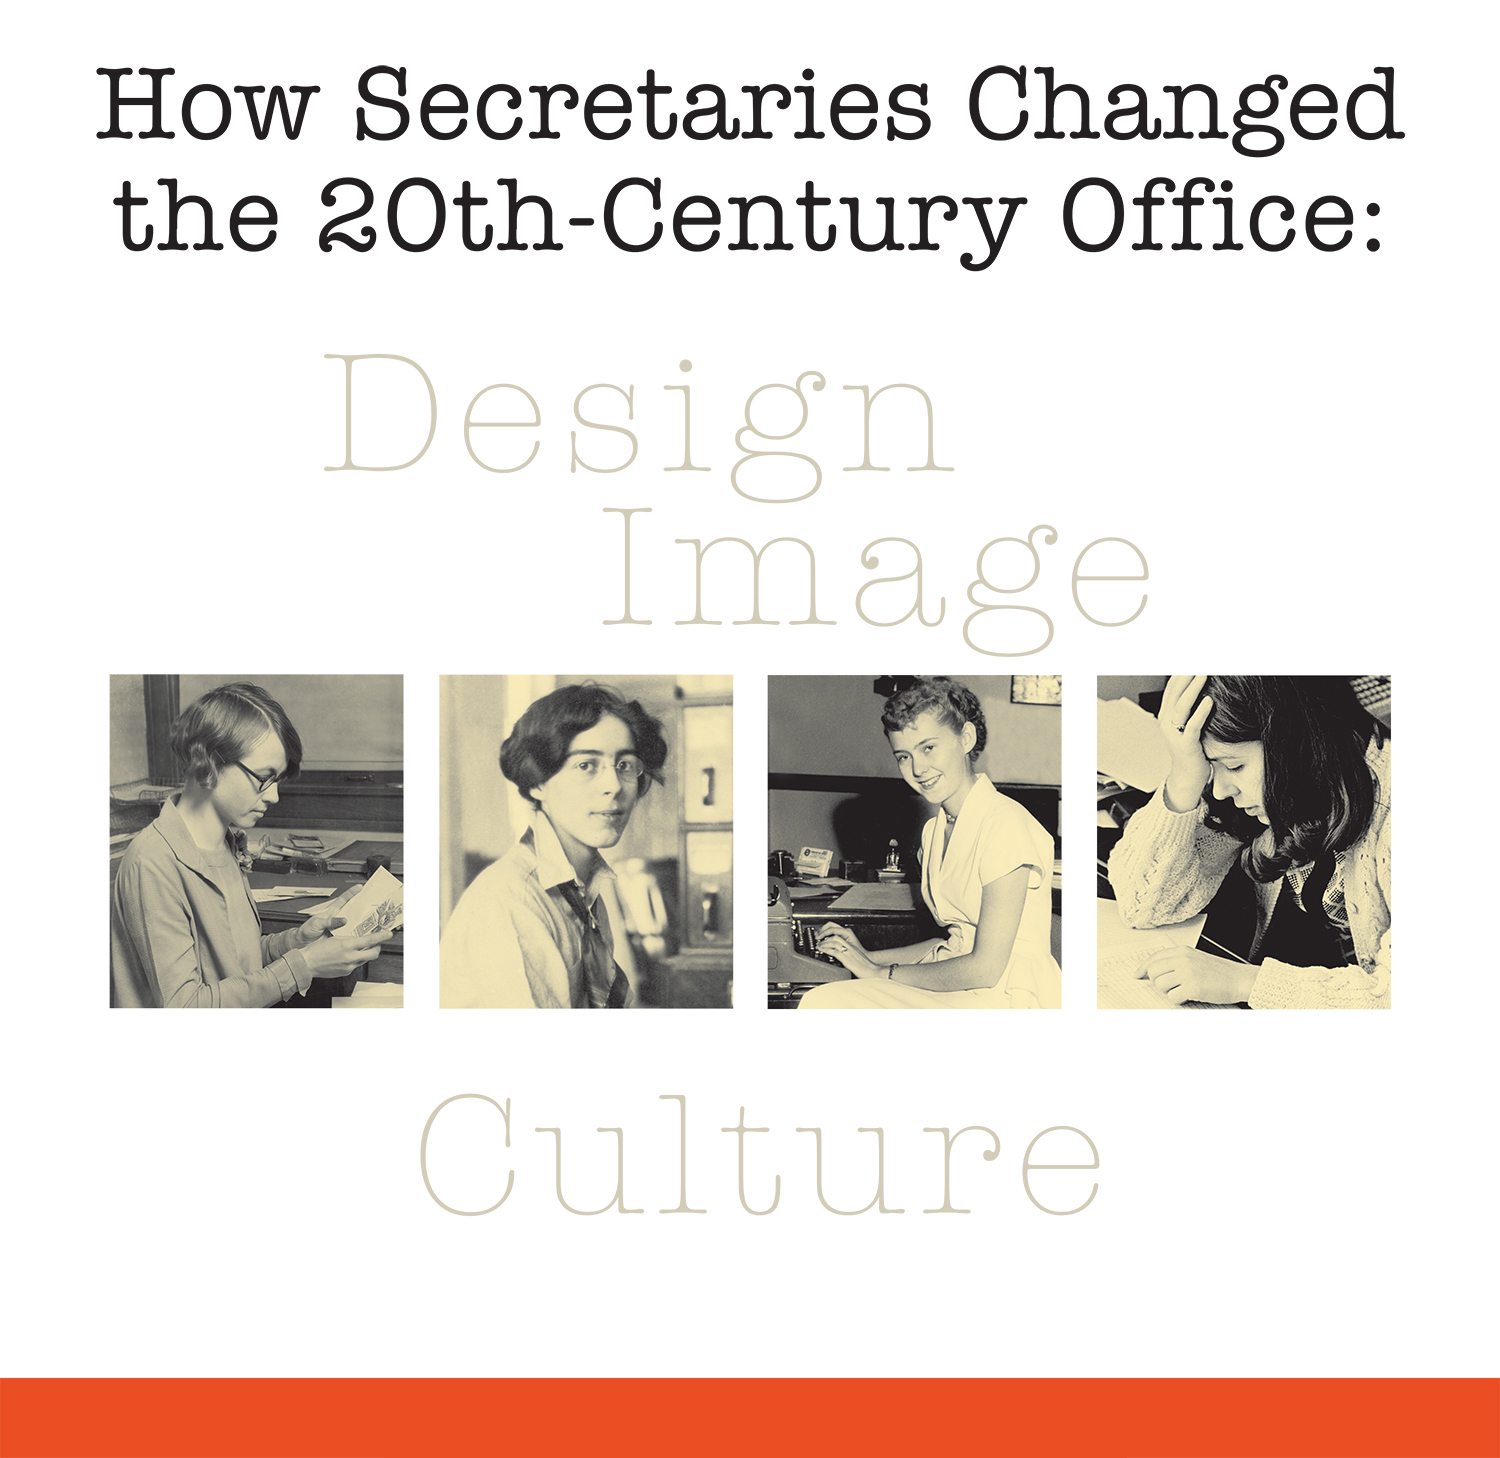 How Secretaries Changed the 20th-Century office: Design, Image, and Culture